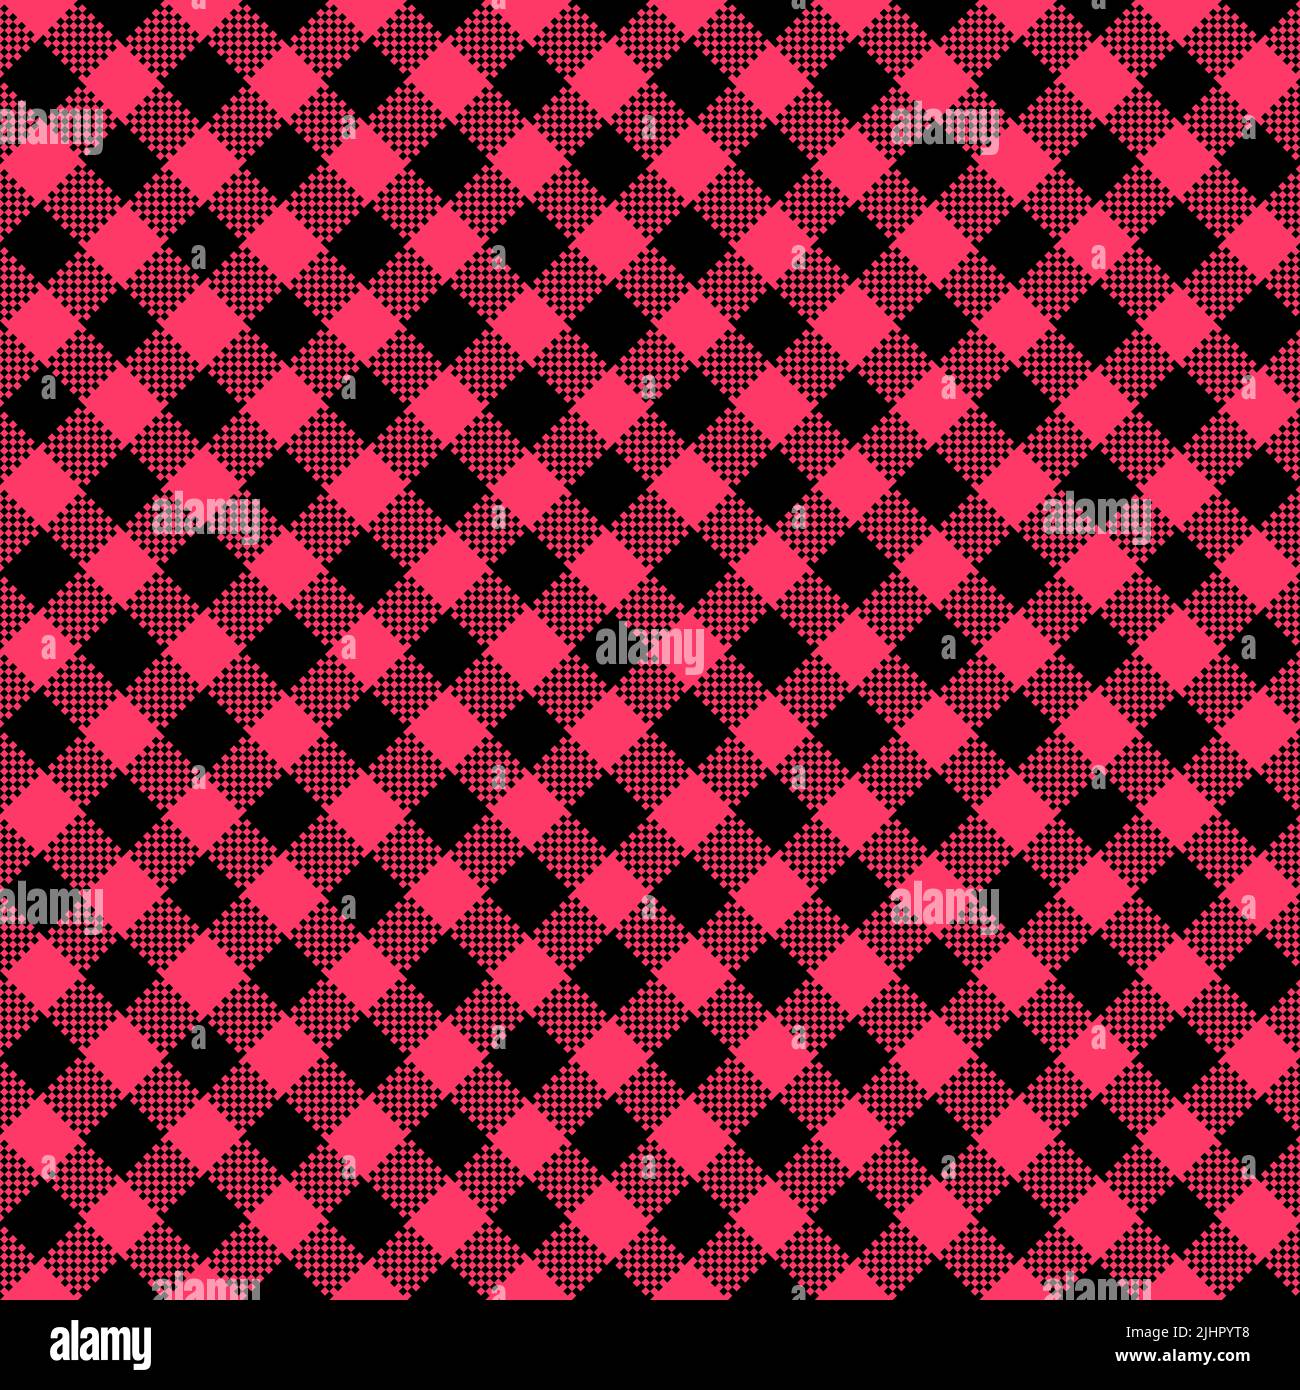 Gingham Pattern. Seamless black pink classic diagonal check pattern. Good for towels, blankets, skirts, napkins, gift paper. Stock Photo